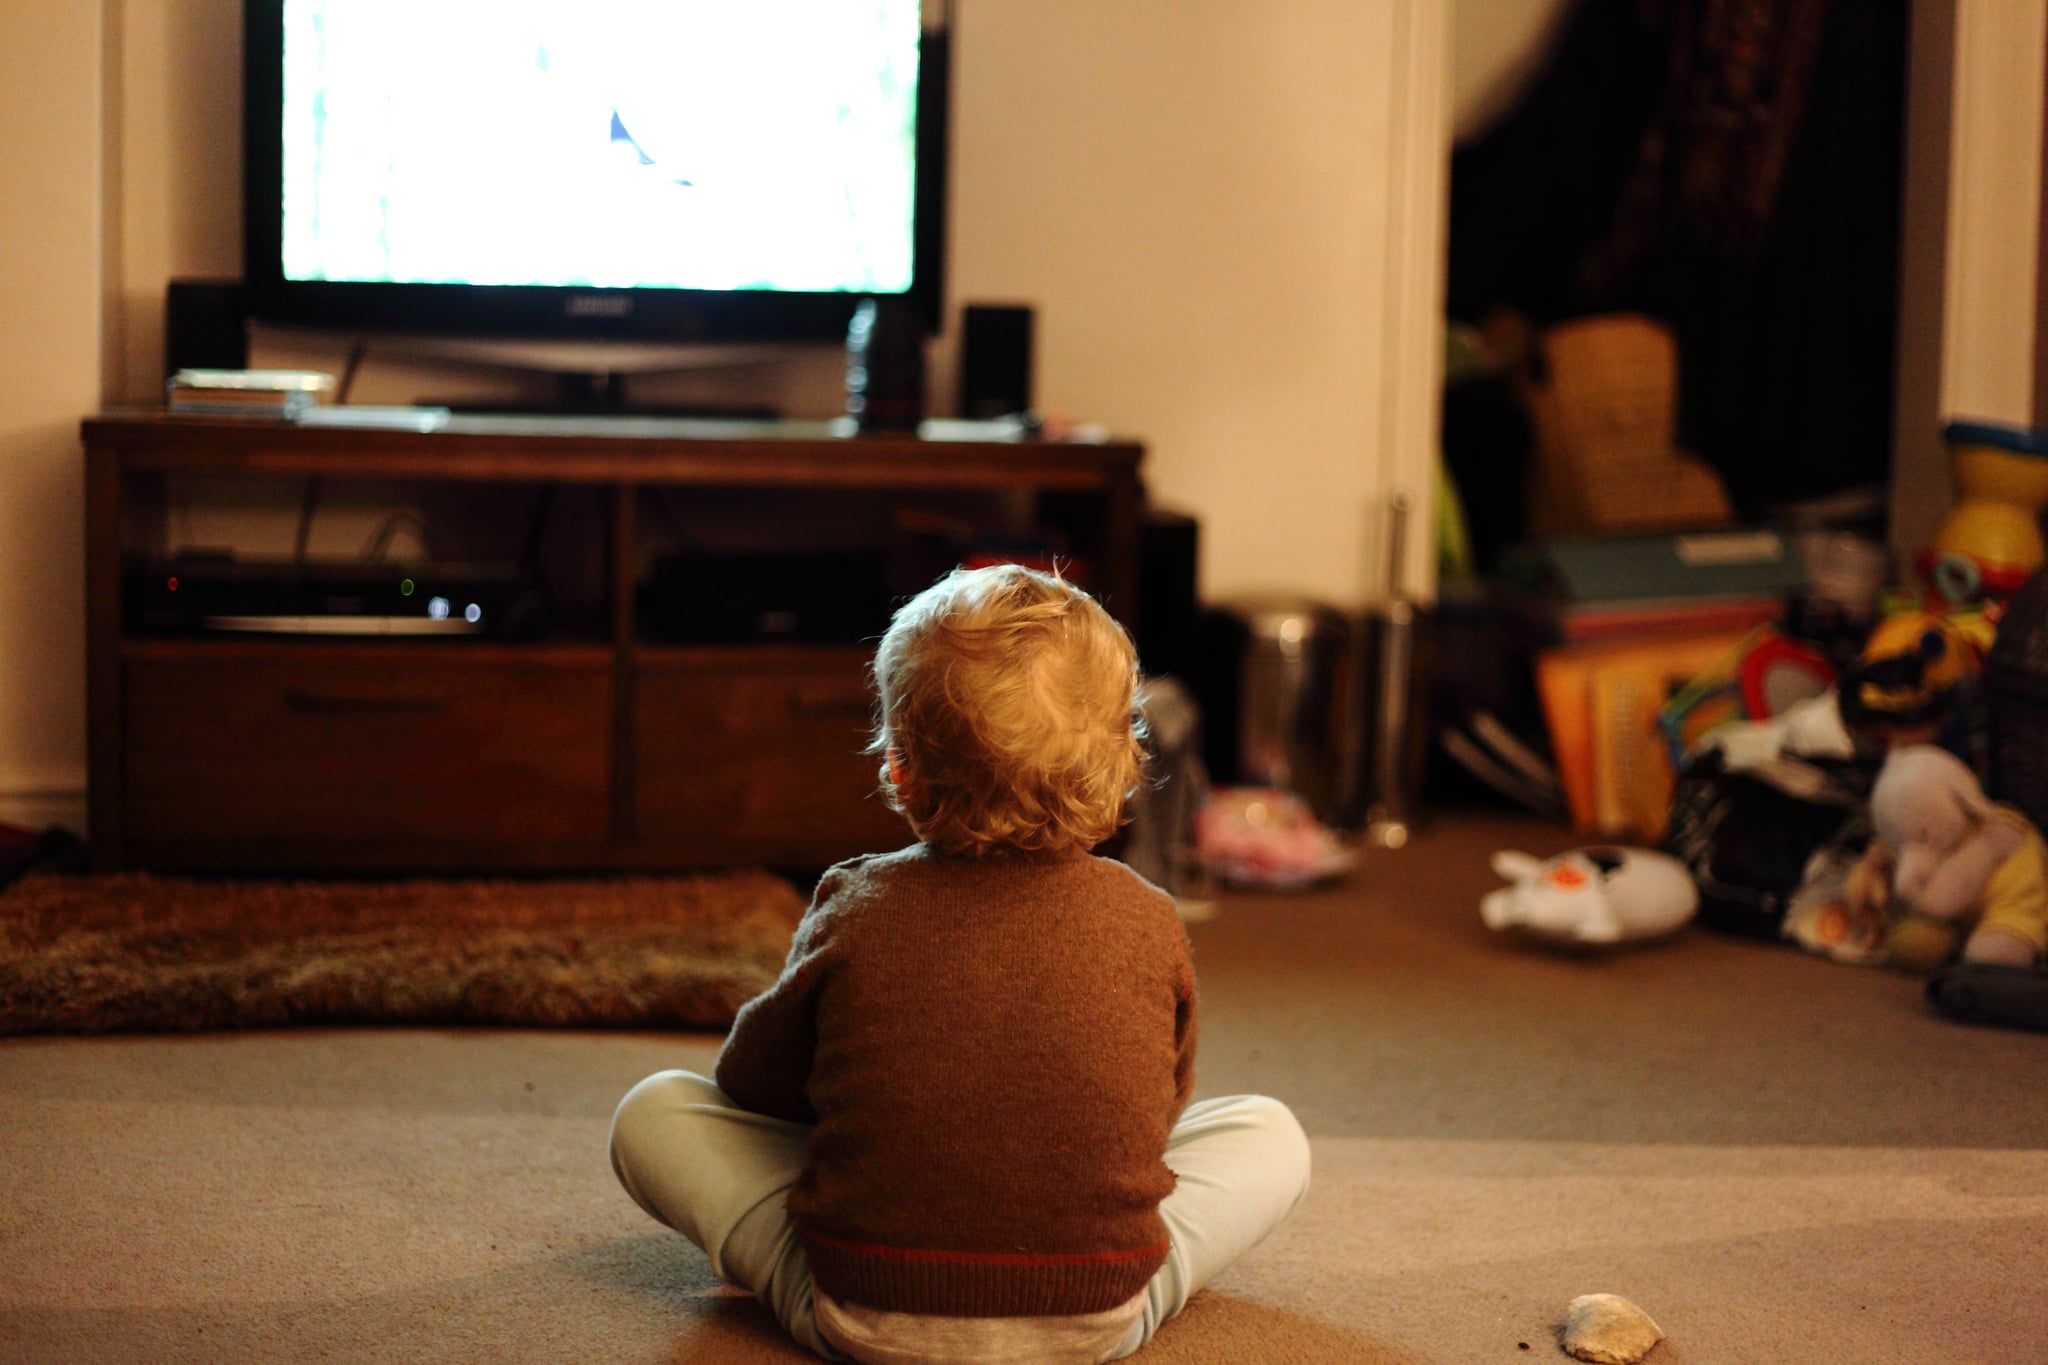 Set children's screen time to 10 times the age of minutes #2